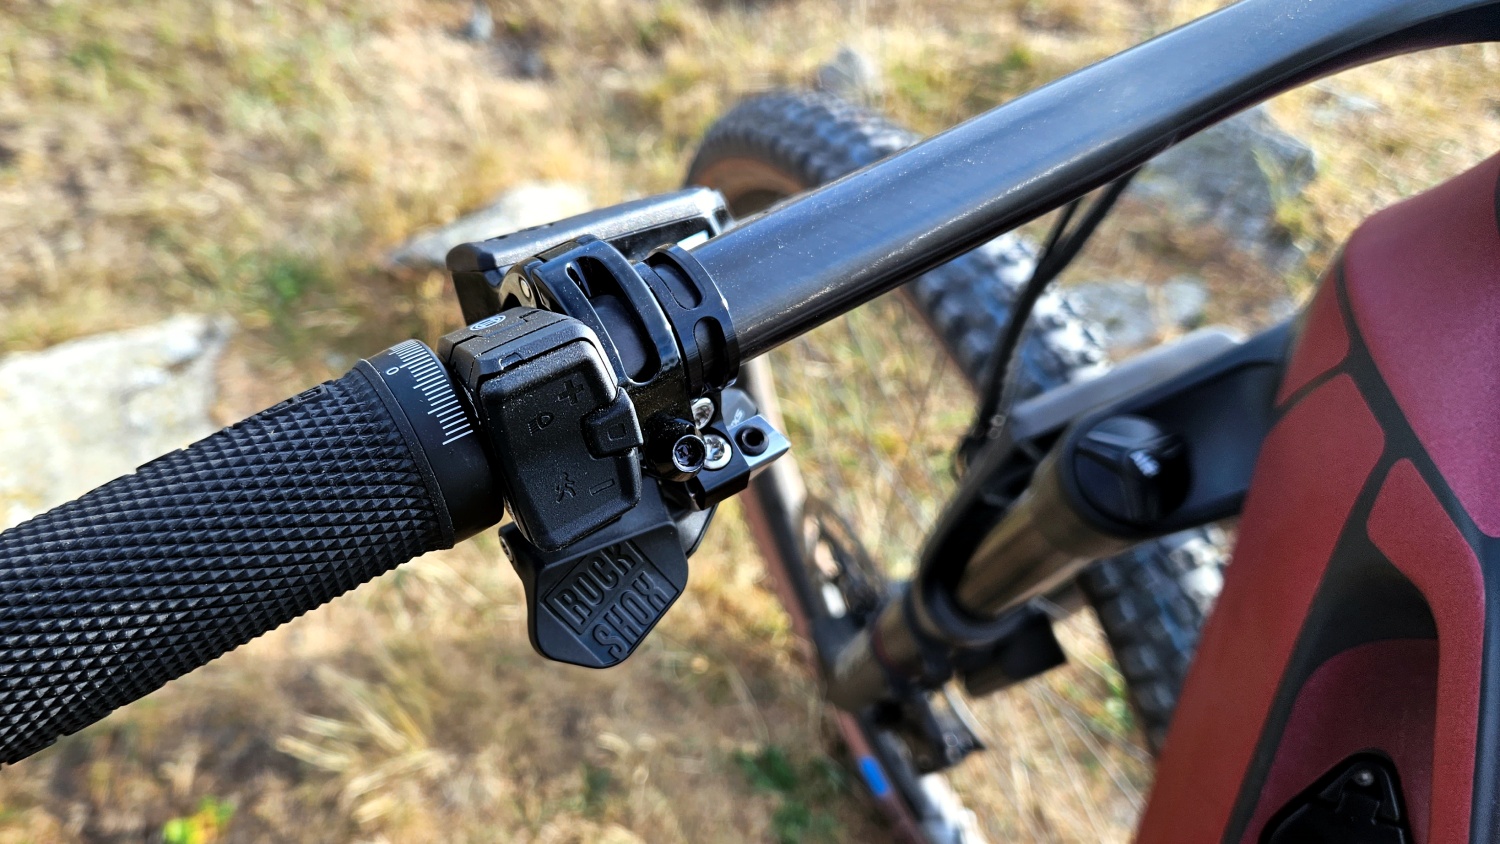 On this particular bike, the handlebar remote was a bit too close to the dropper, making me accidentally drop motor assistance.